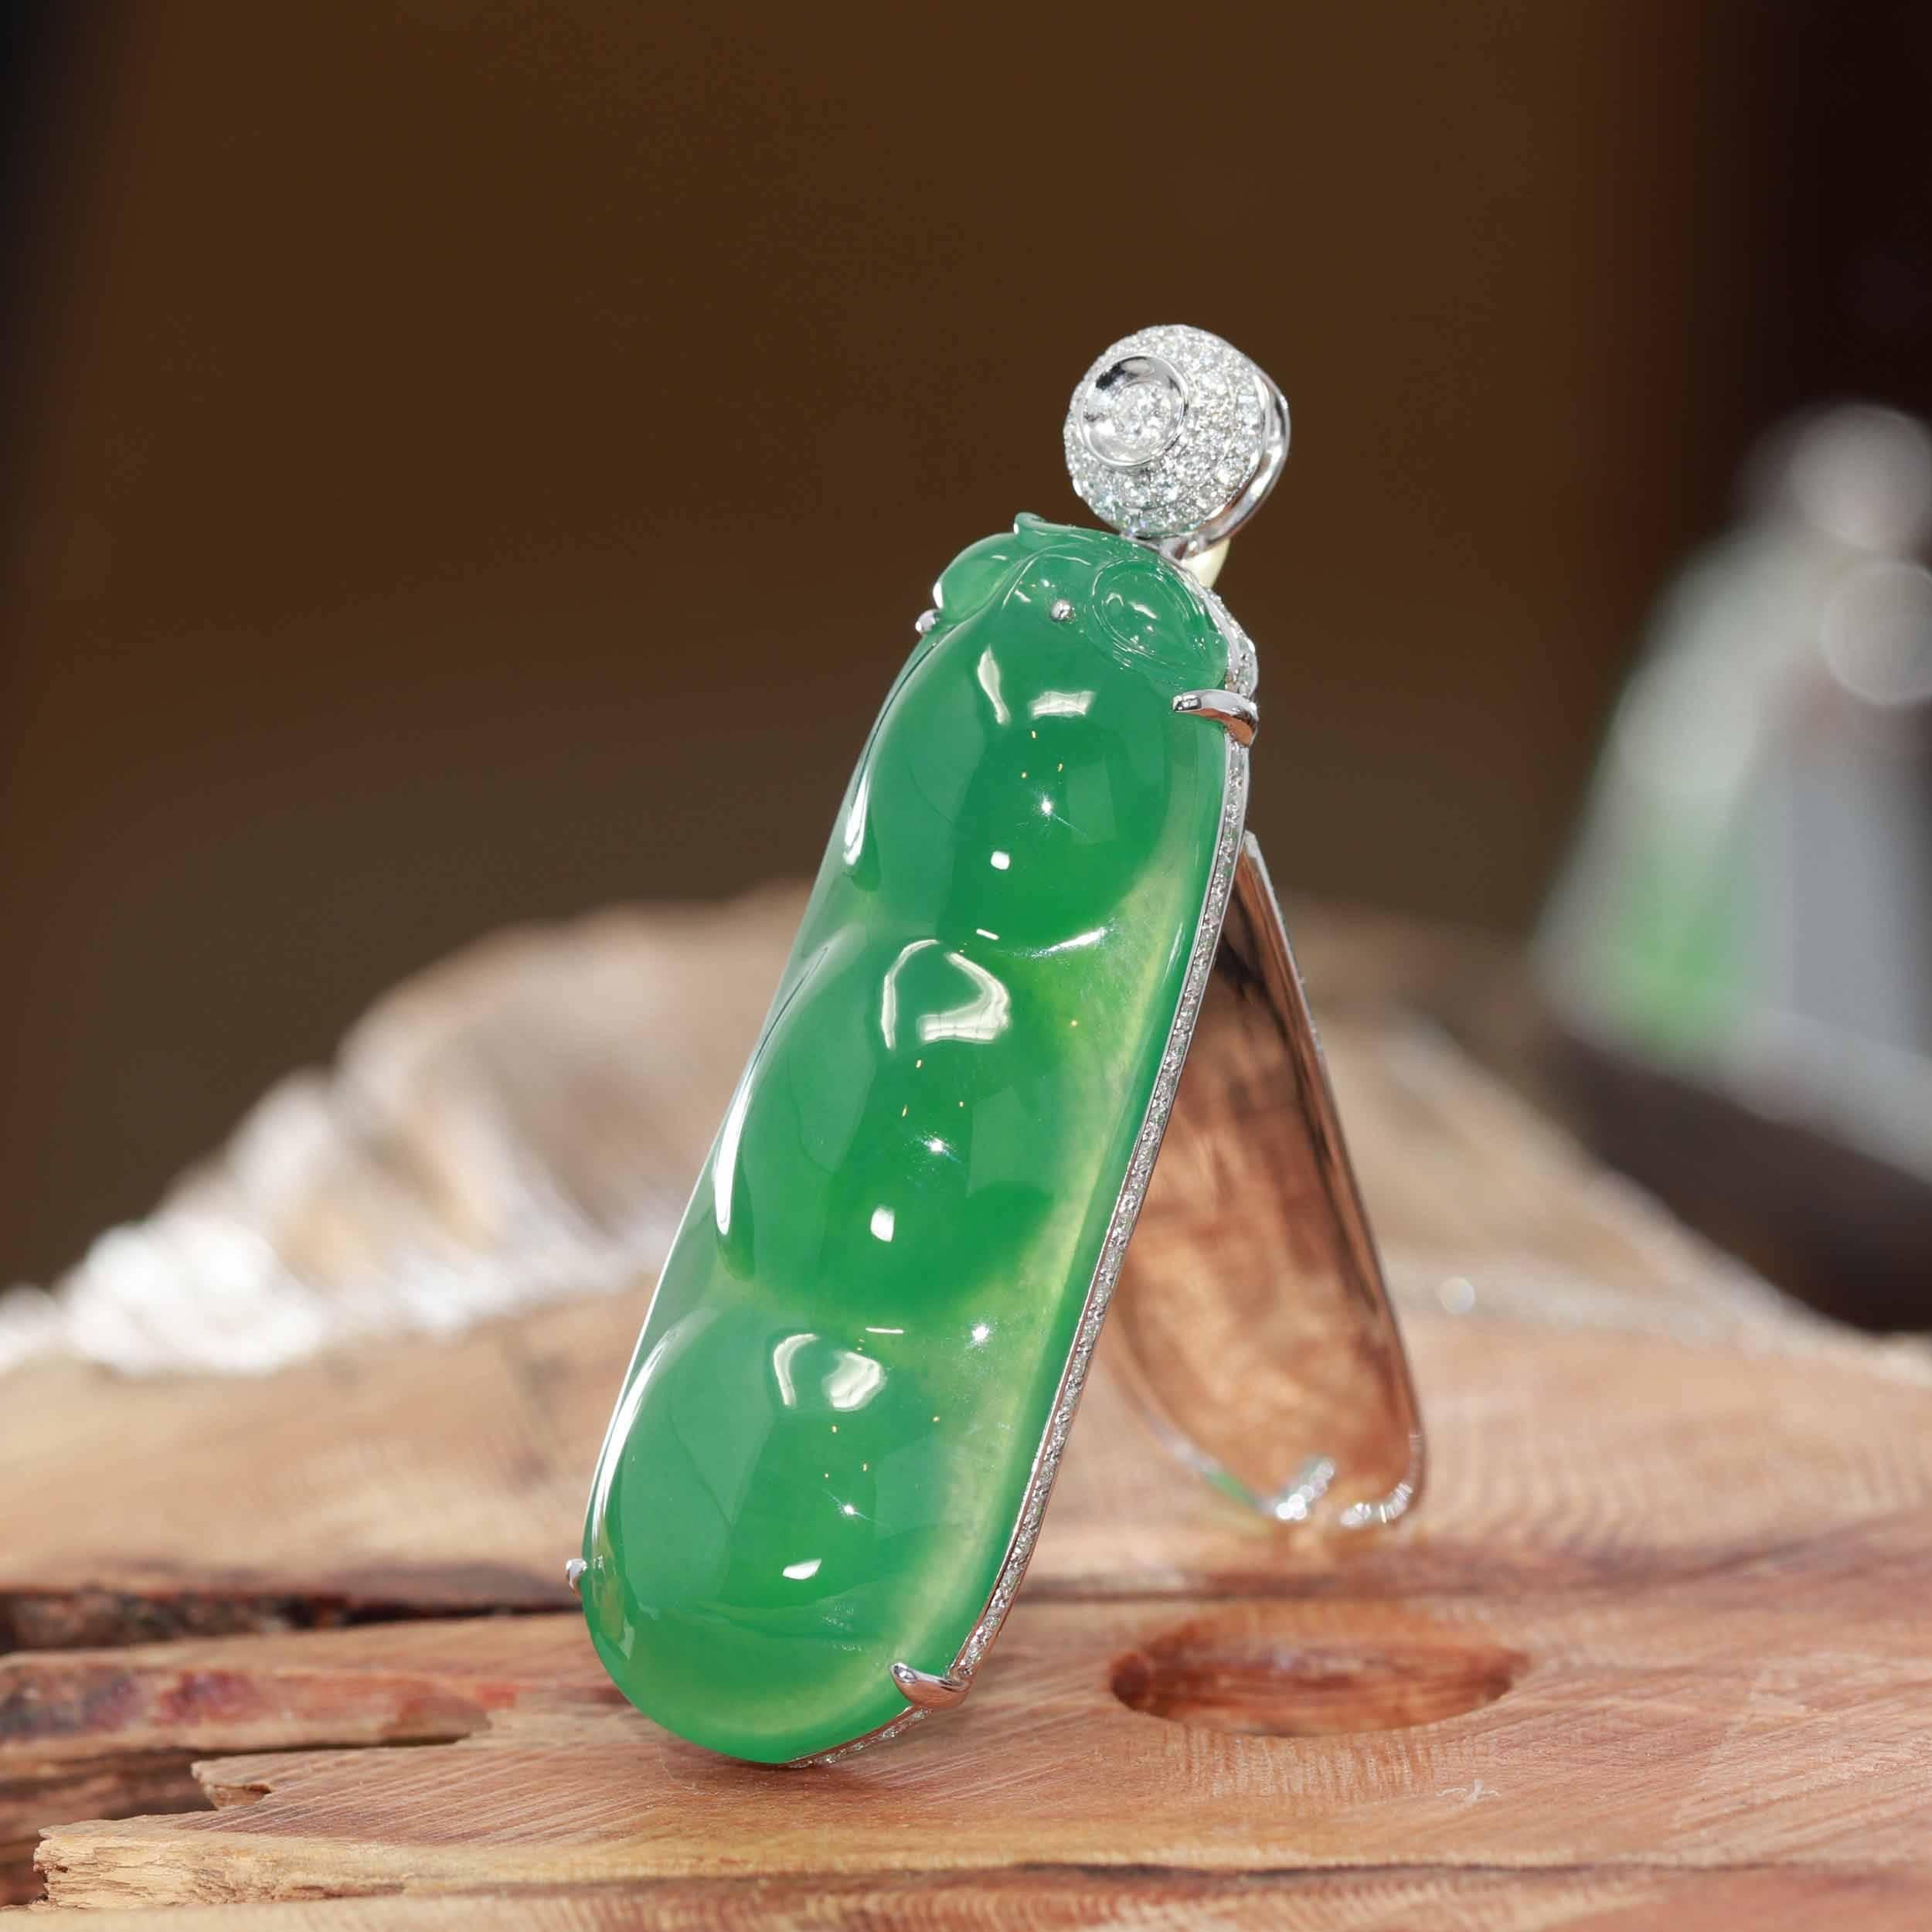 * DESIGN CONCEPT--- High-quality Genuine Burmese Imperial Jadeite Pendant Necklace. This pendant is comprised of one-piece high-quality Burmese imperial green jadeite. The high-end imperial jadeite of this shade is very rare and valuable. Once in a